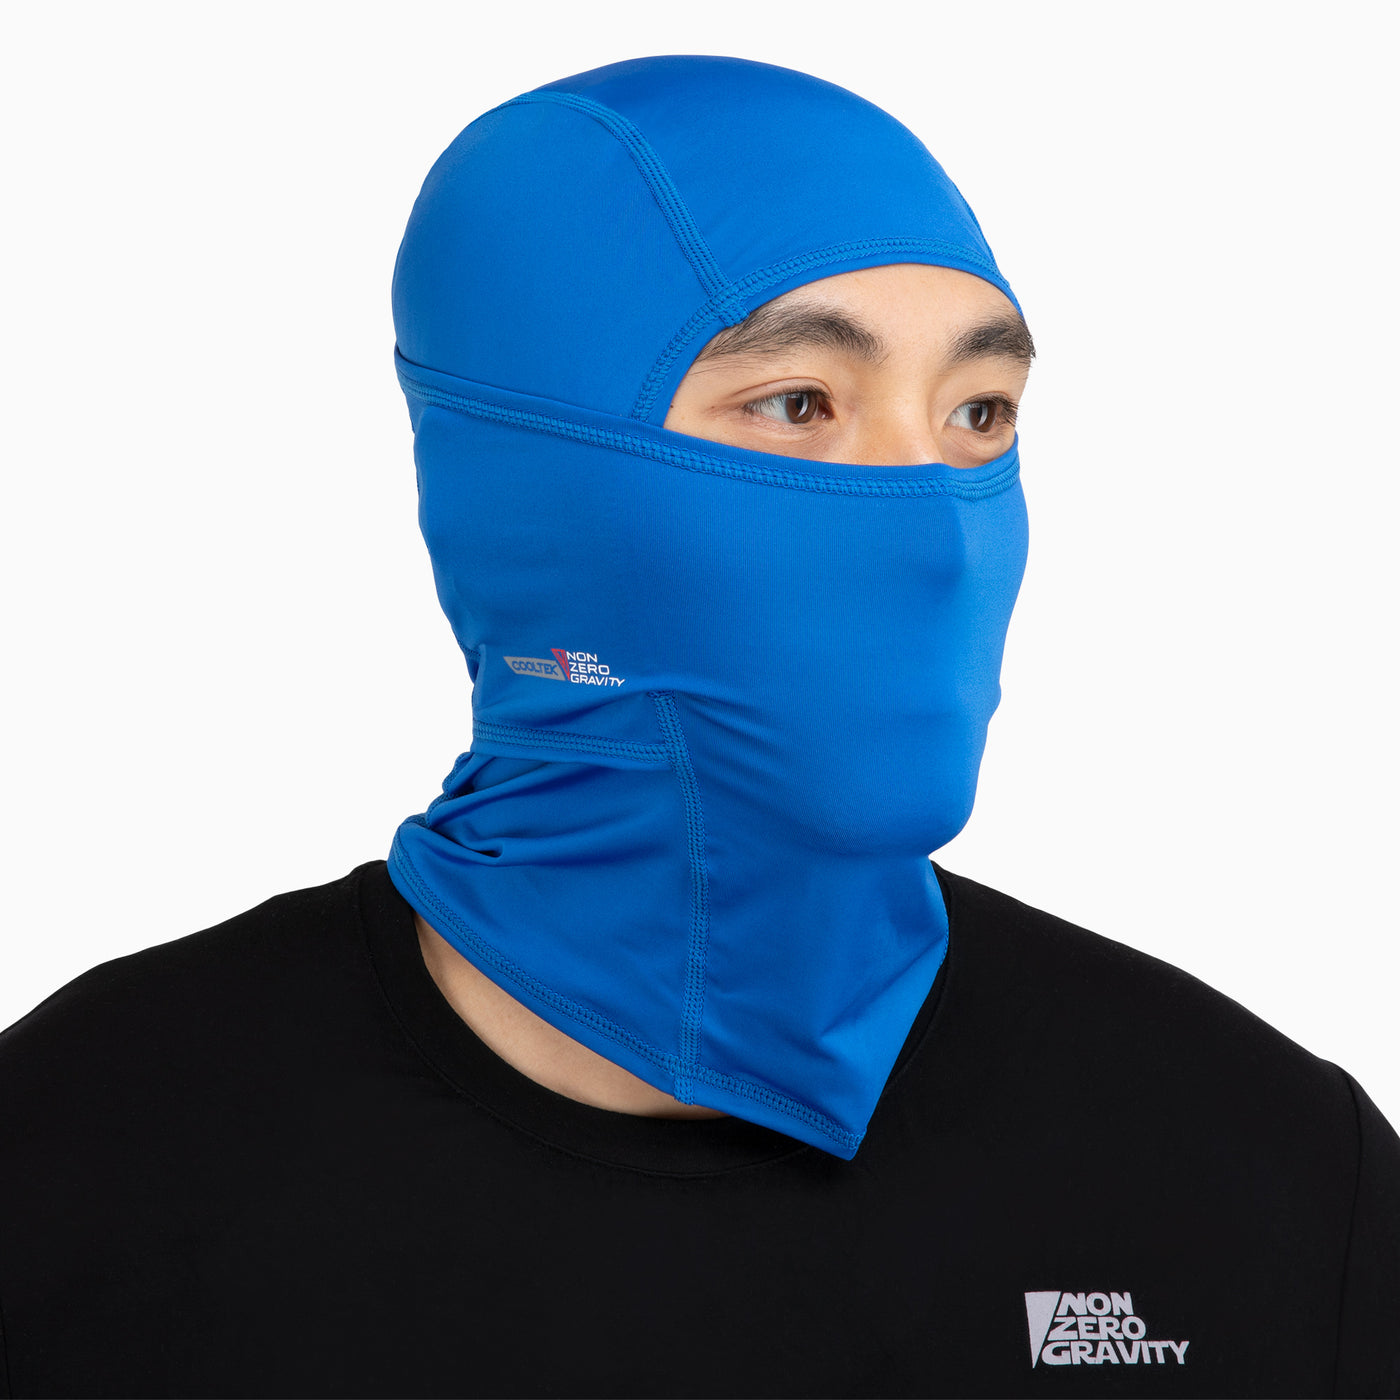 a royal blue spandex athletic balaclava to mask and protect your face